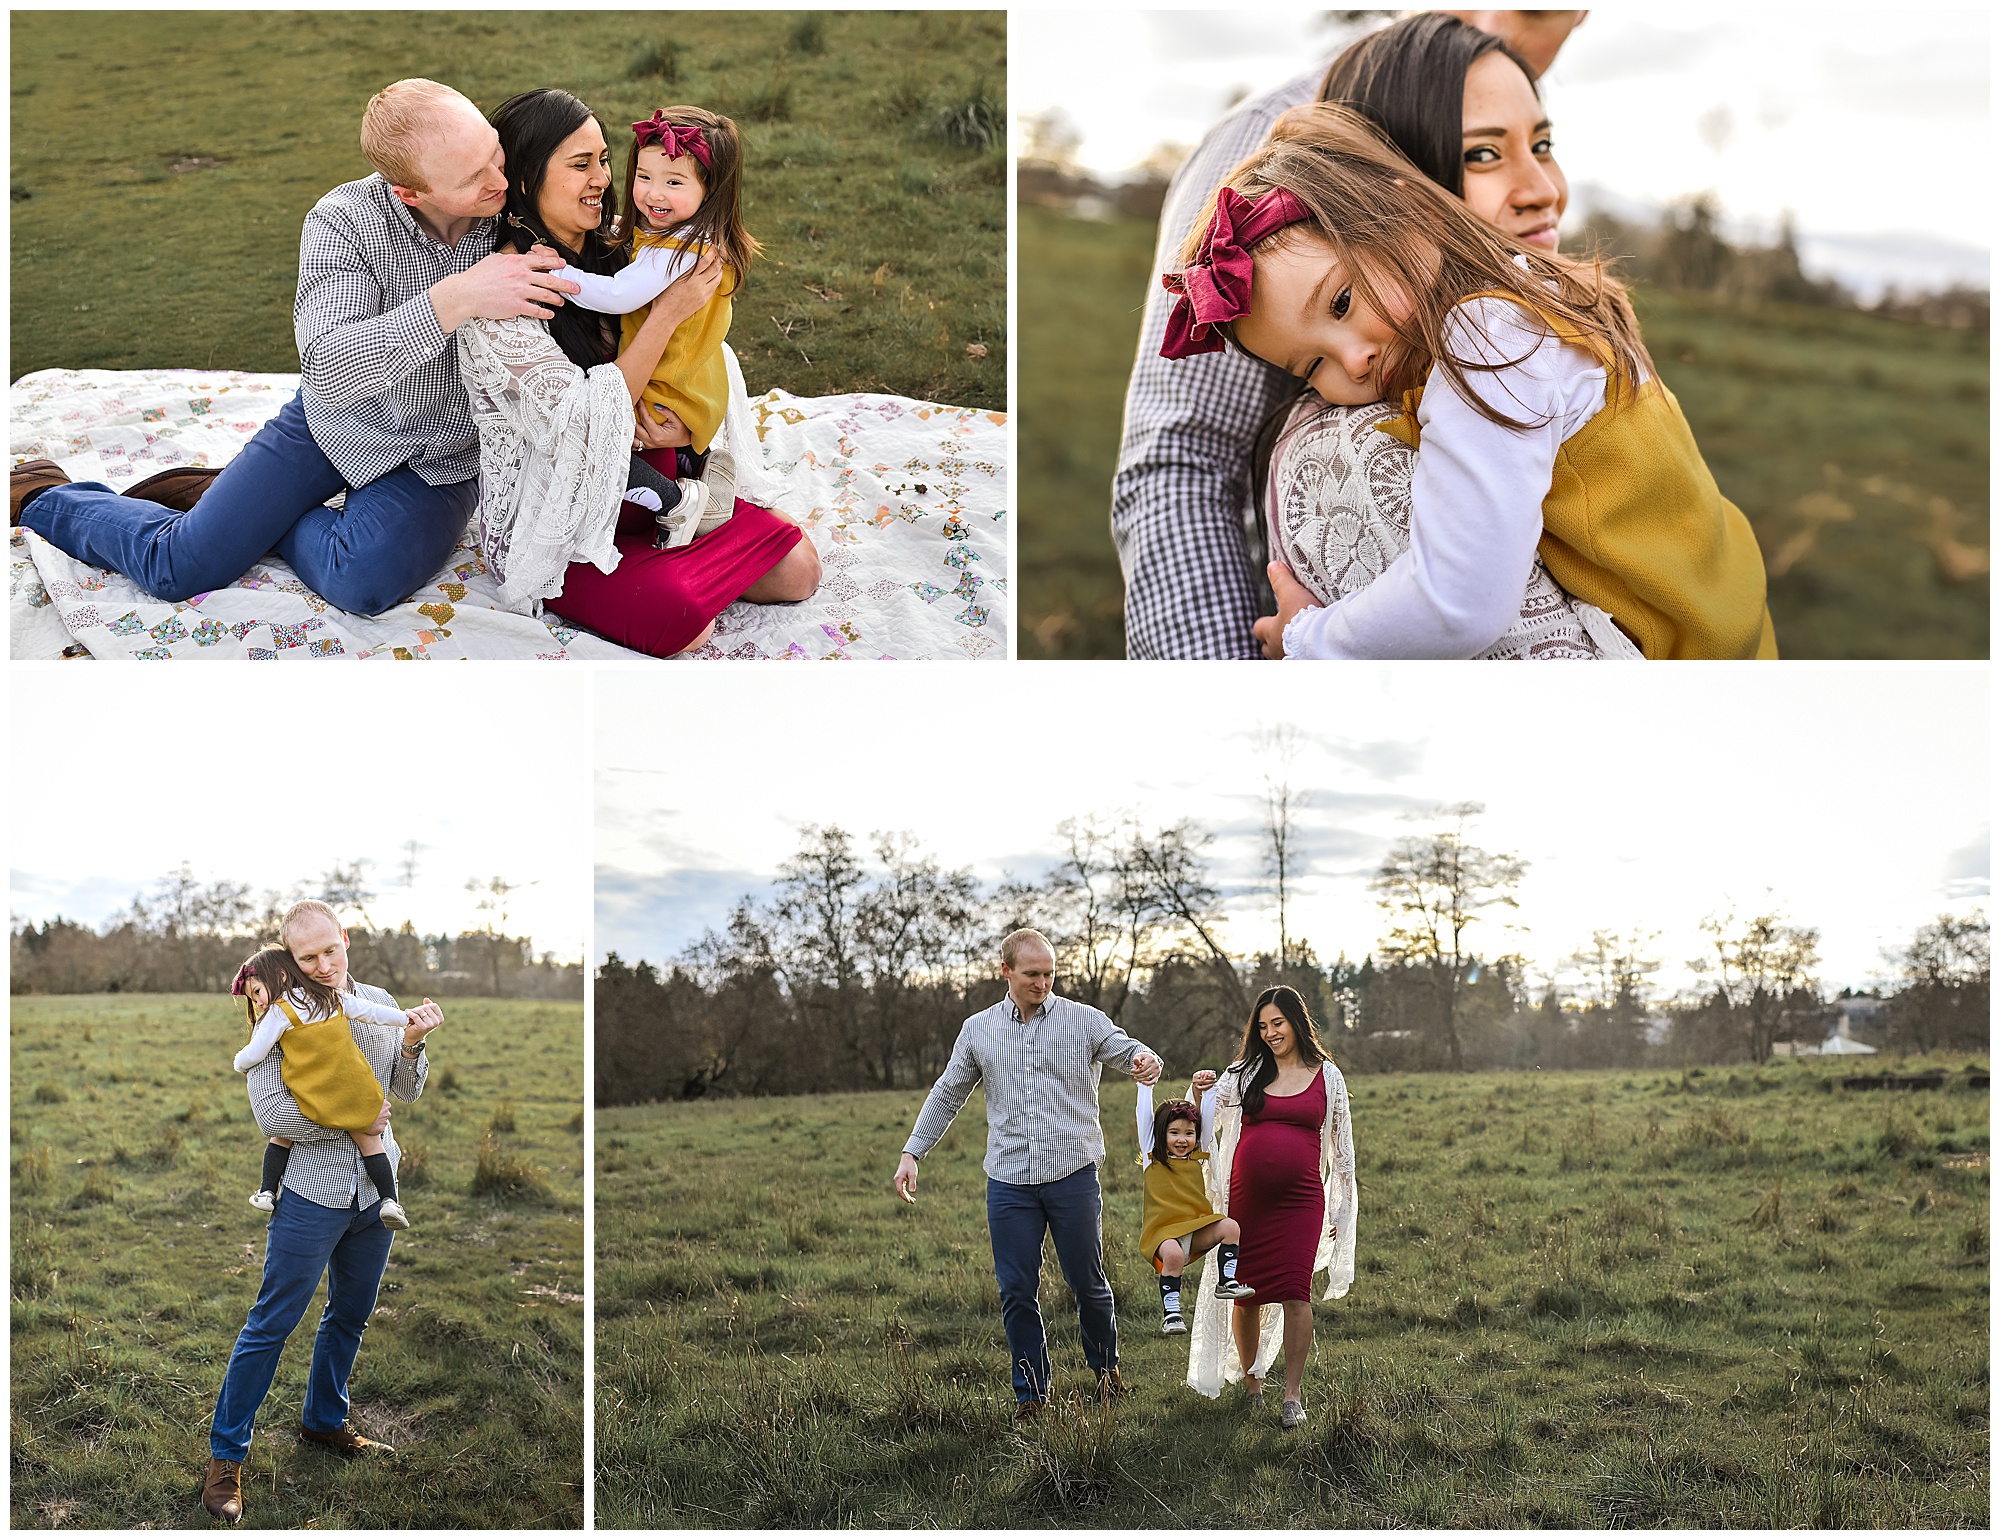 Lifestyle Maternity Photoshoot family at field in Tacoma Fort Steilacoom Emily Ann Photography Seattle Photographer.